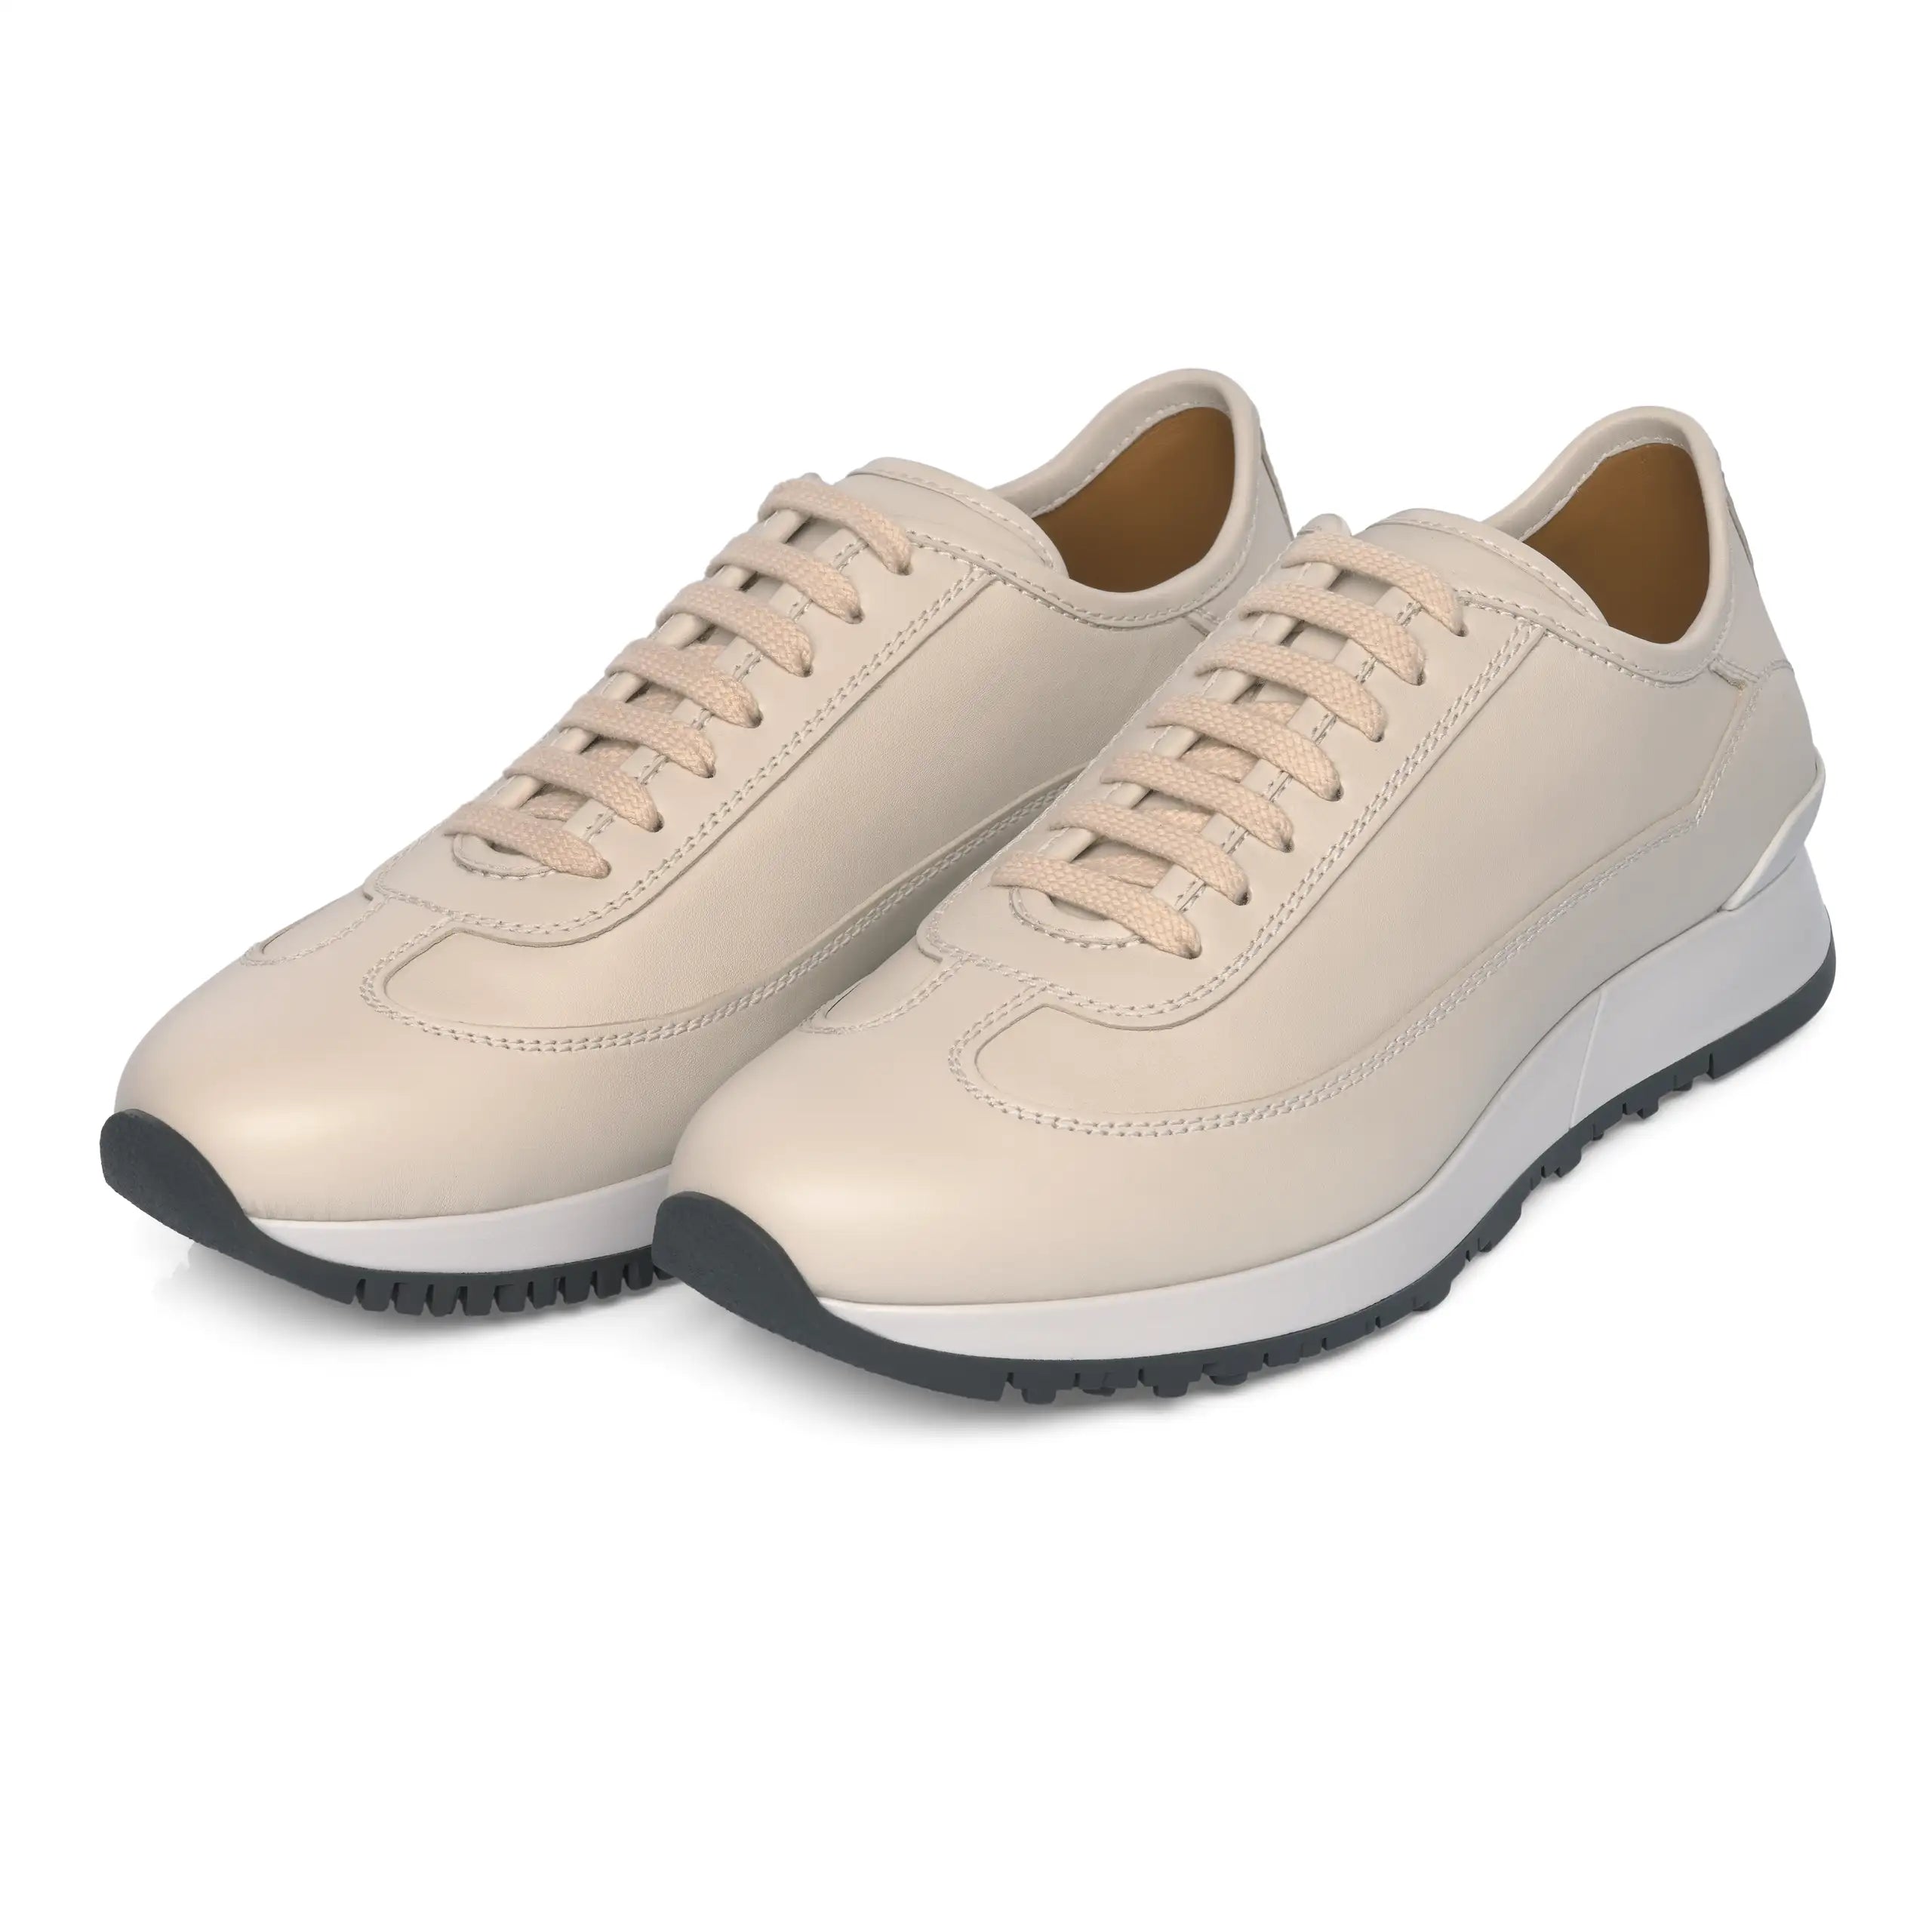 "Foundry II" Calf Leather Sneakers in Off White